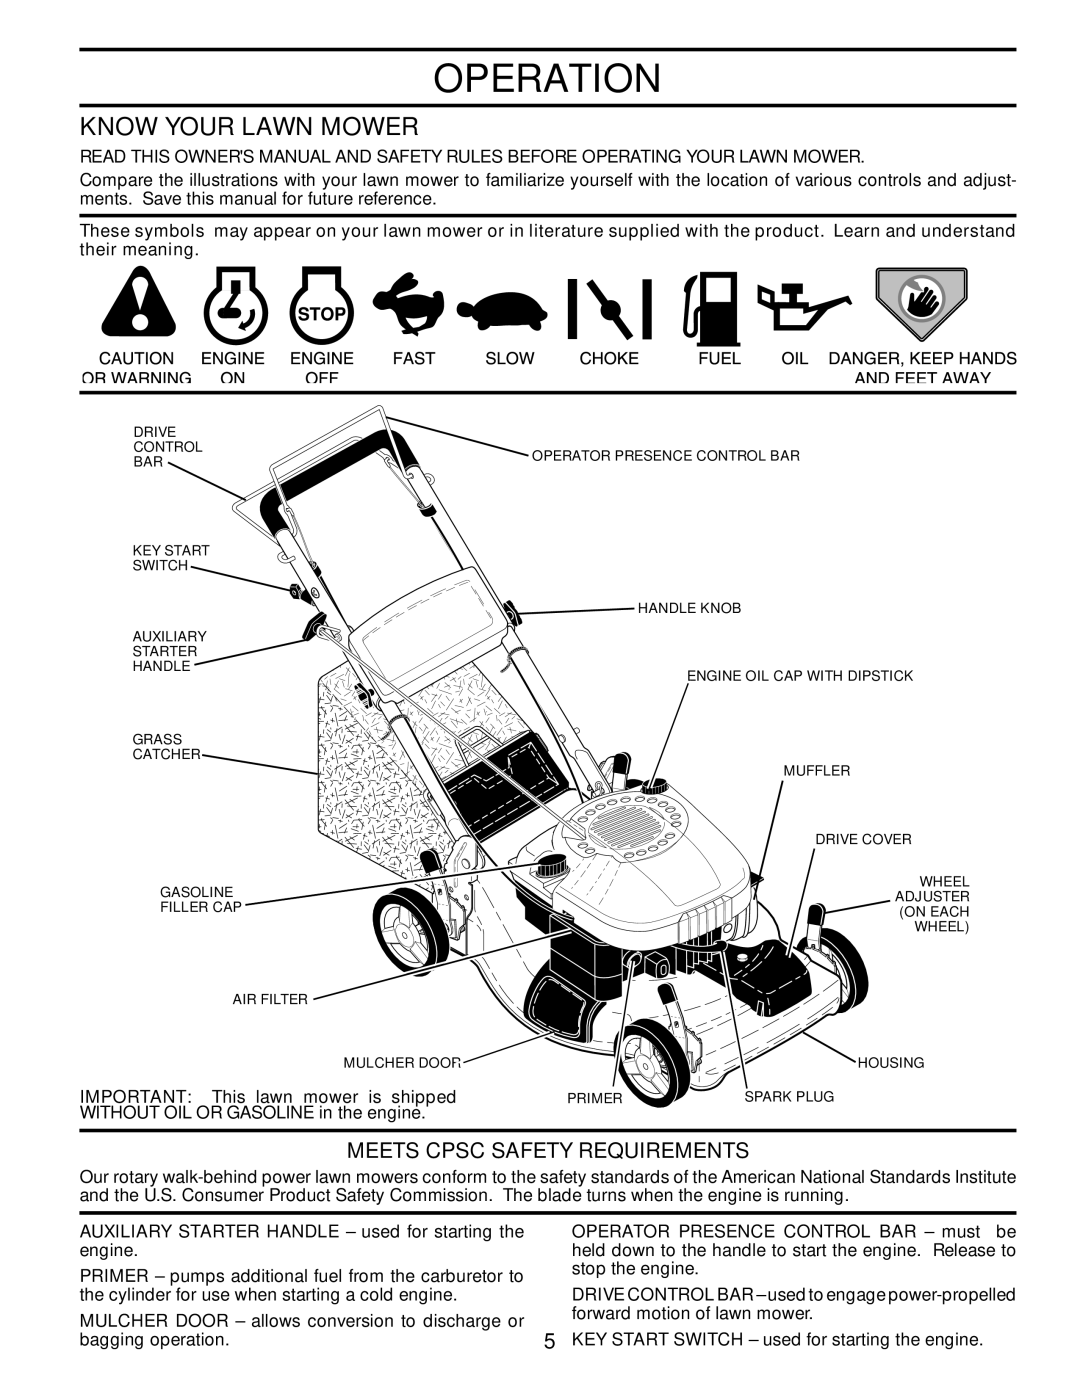 Husqvarna 532424698, 96143004500 owner manual Operation, Know Your Lawn Mower, Meets Cpsc Safety Requirements 